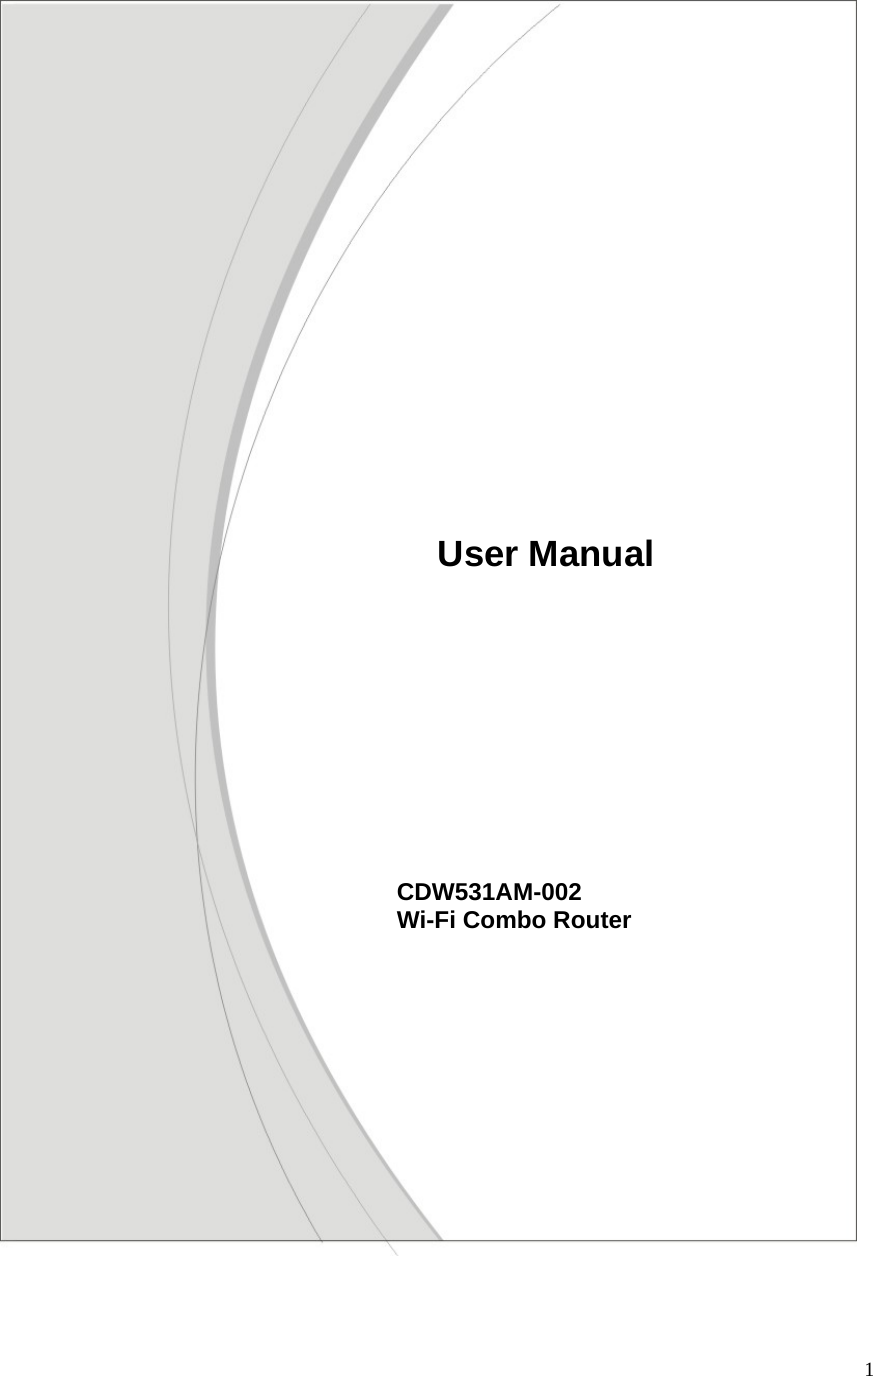  1                                                                                                   CDW531AM-002  Wi-Fi Combo Router   User Manual  